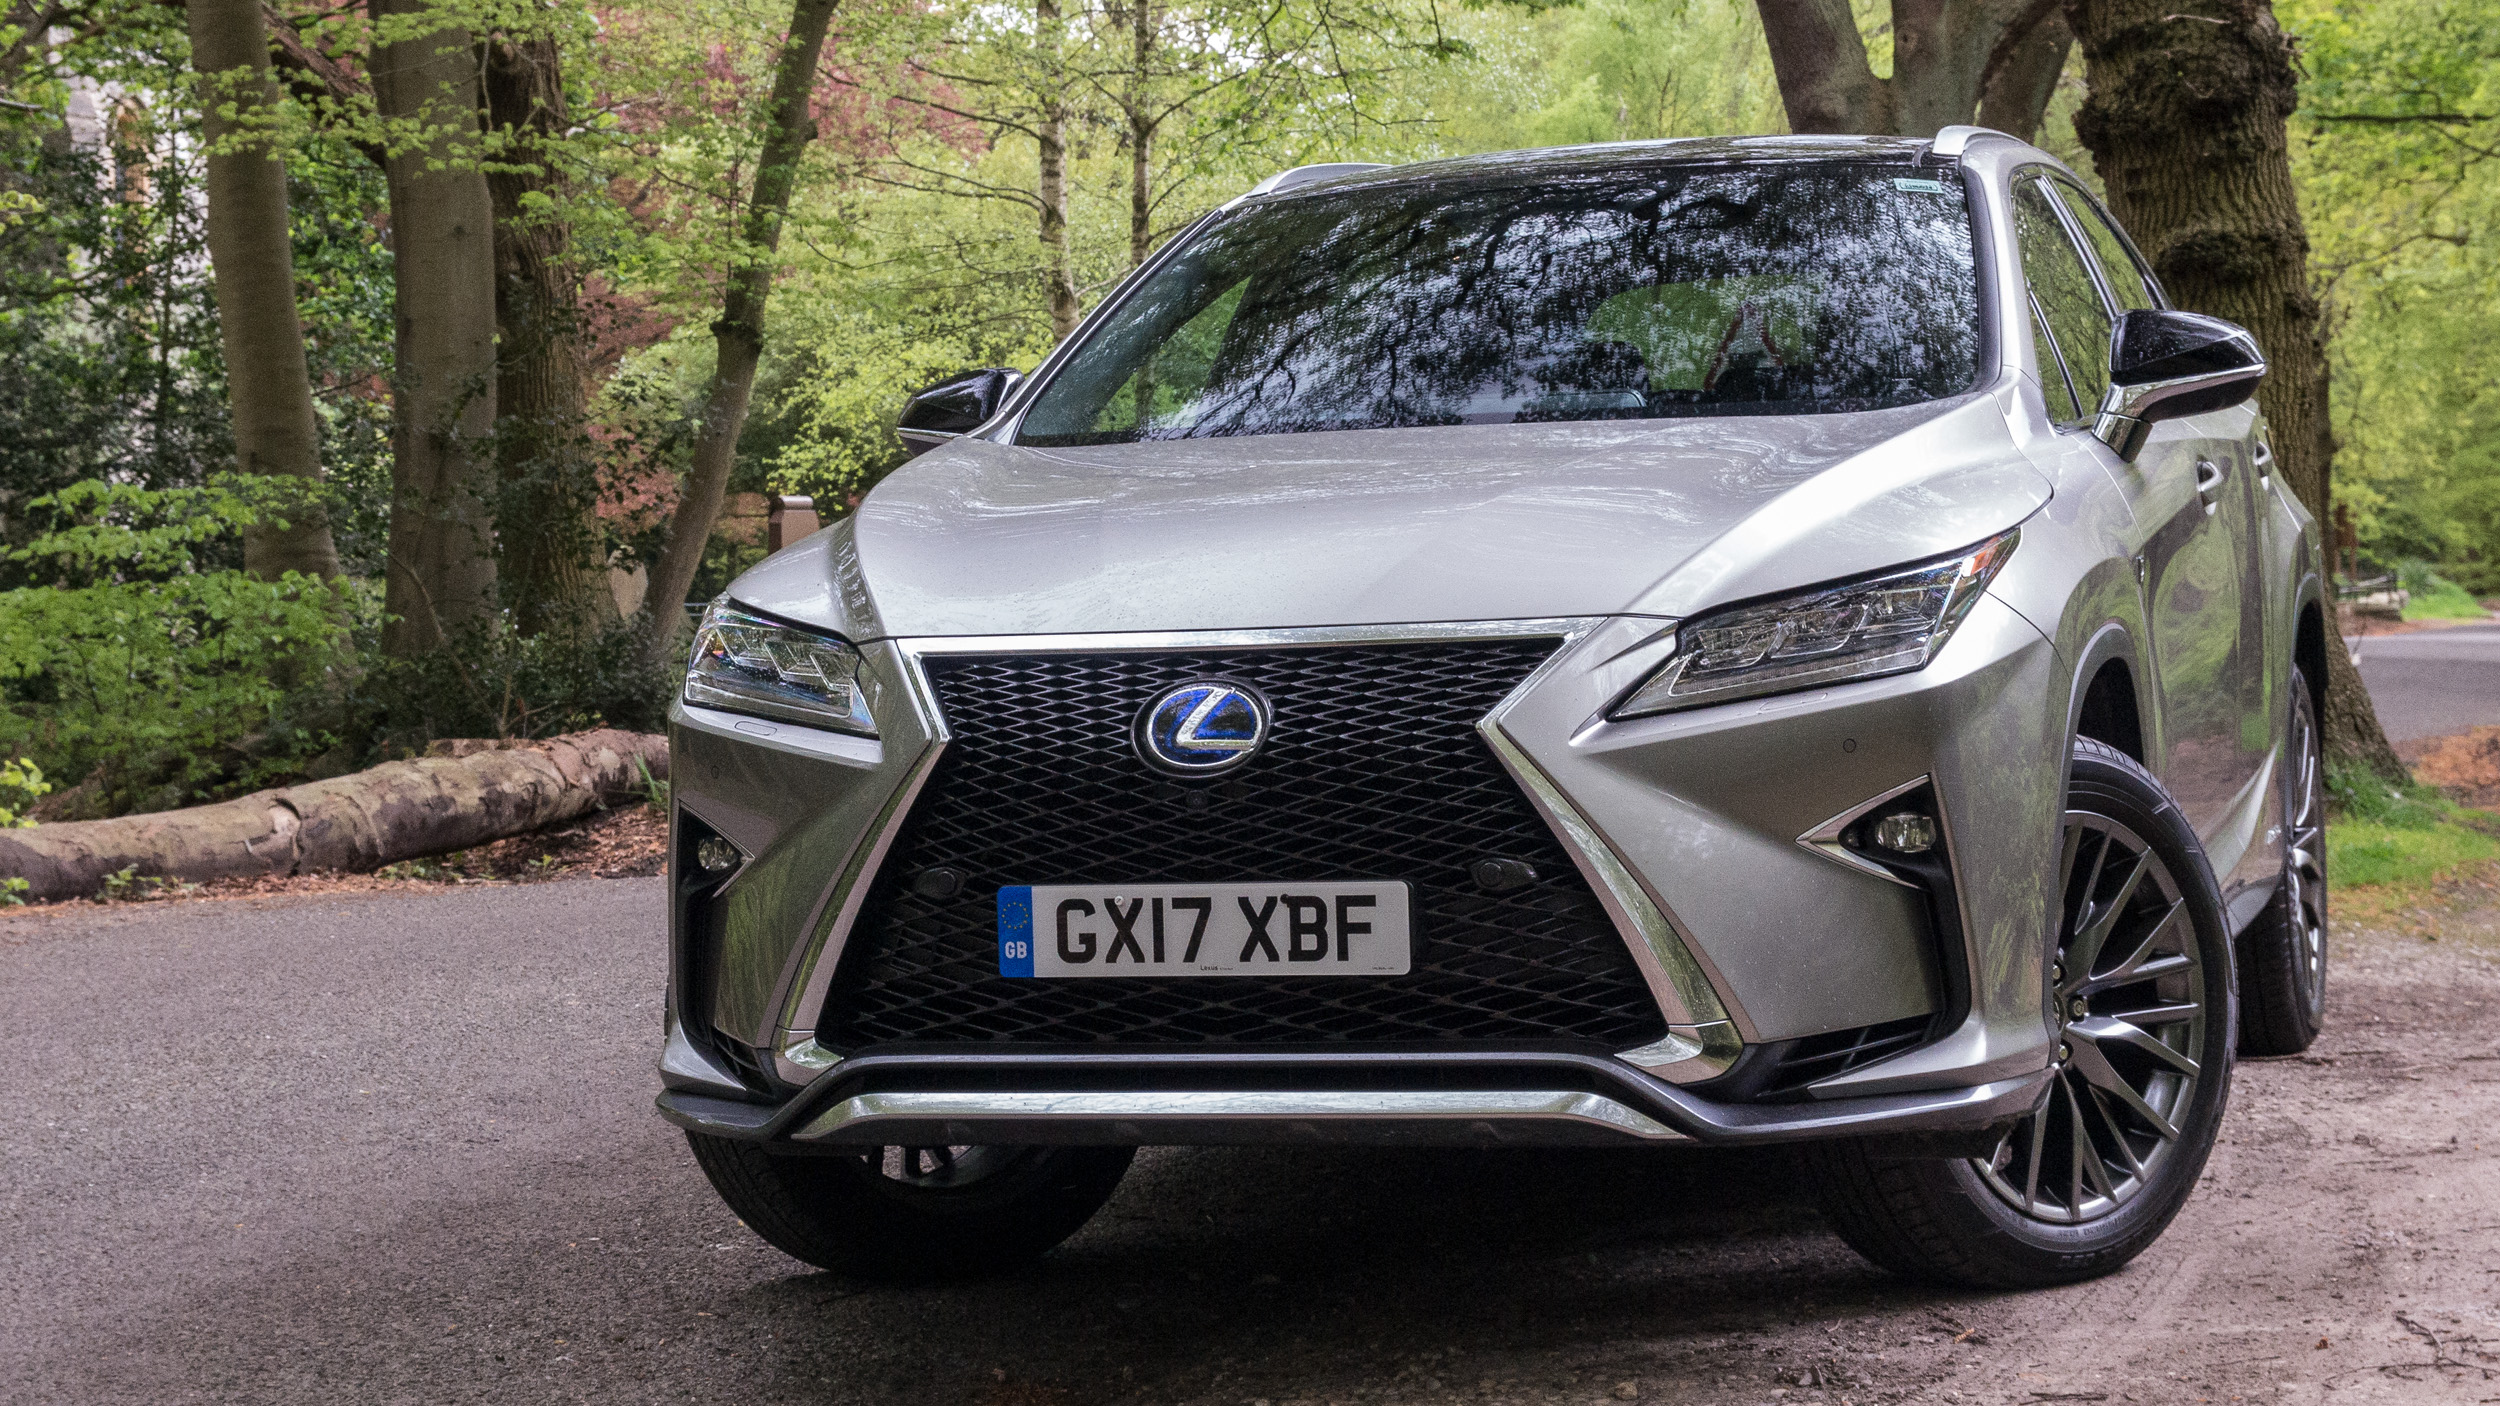 Lexus RX 450h review: Different but flawed